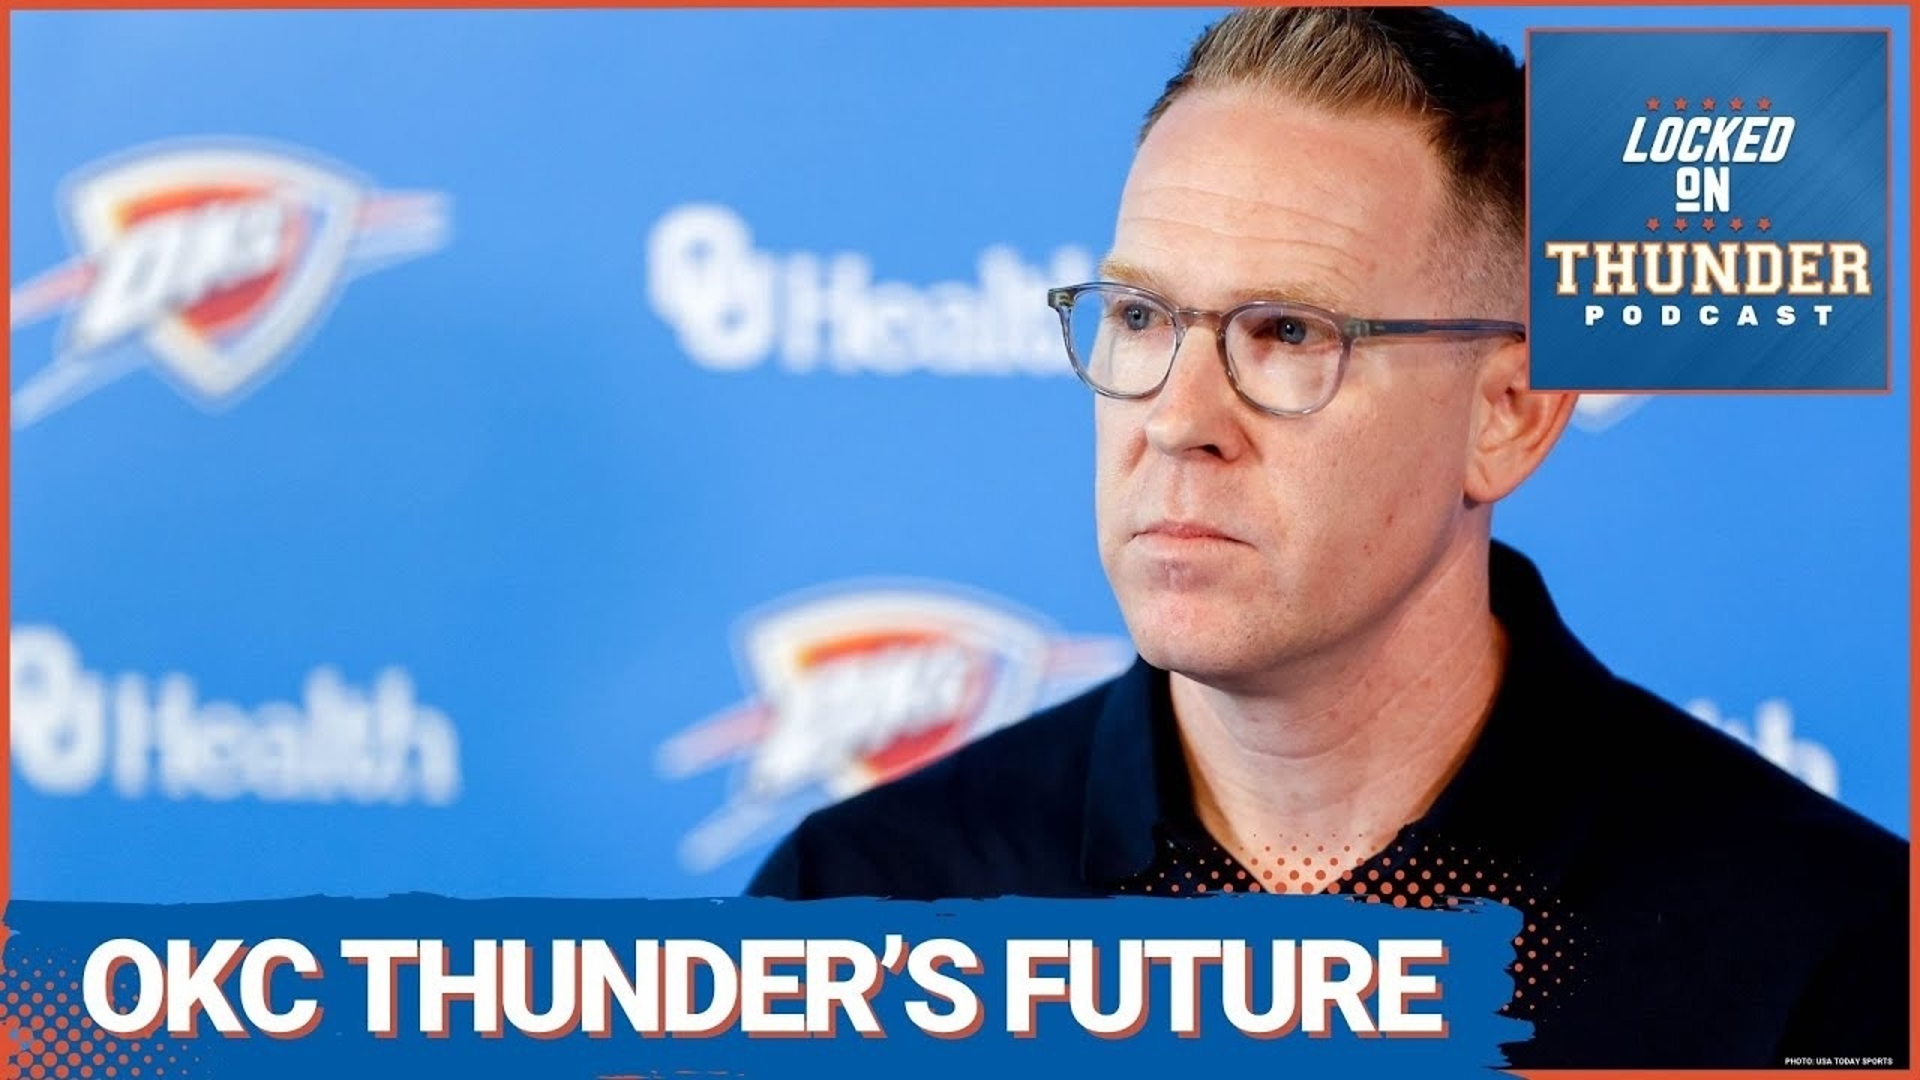 The Oklahoma City Thunder saw Sam Presti hold his annual end-of-season exit interview on Tuesday, what did learn about OKC Thunder's future from Presti?